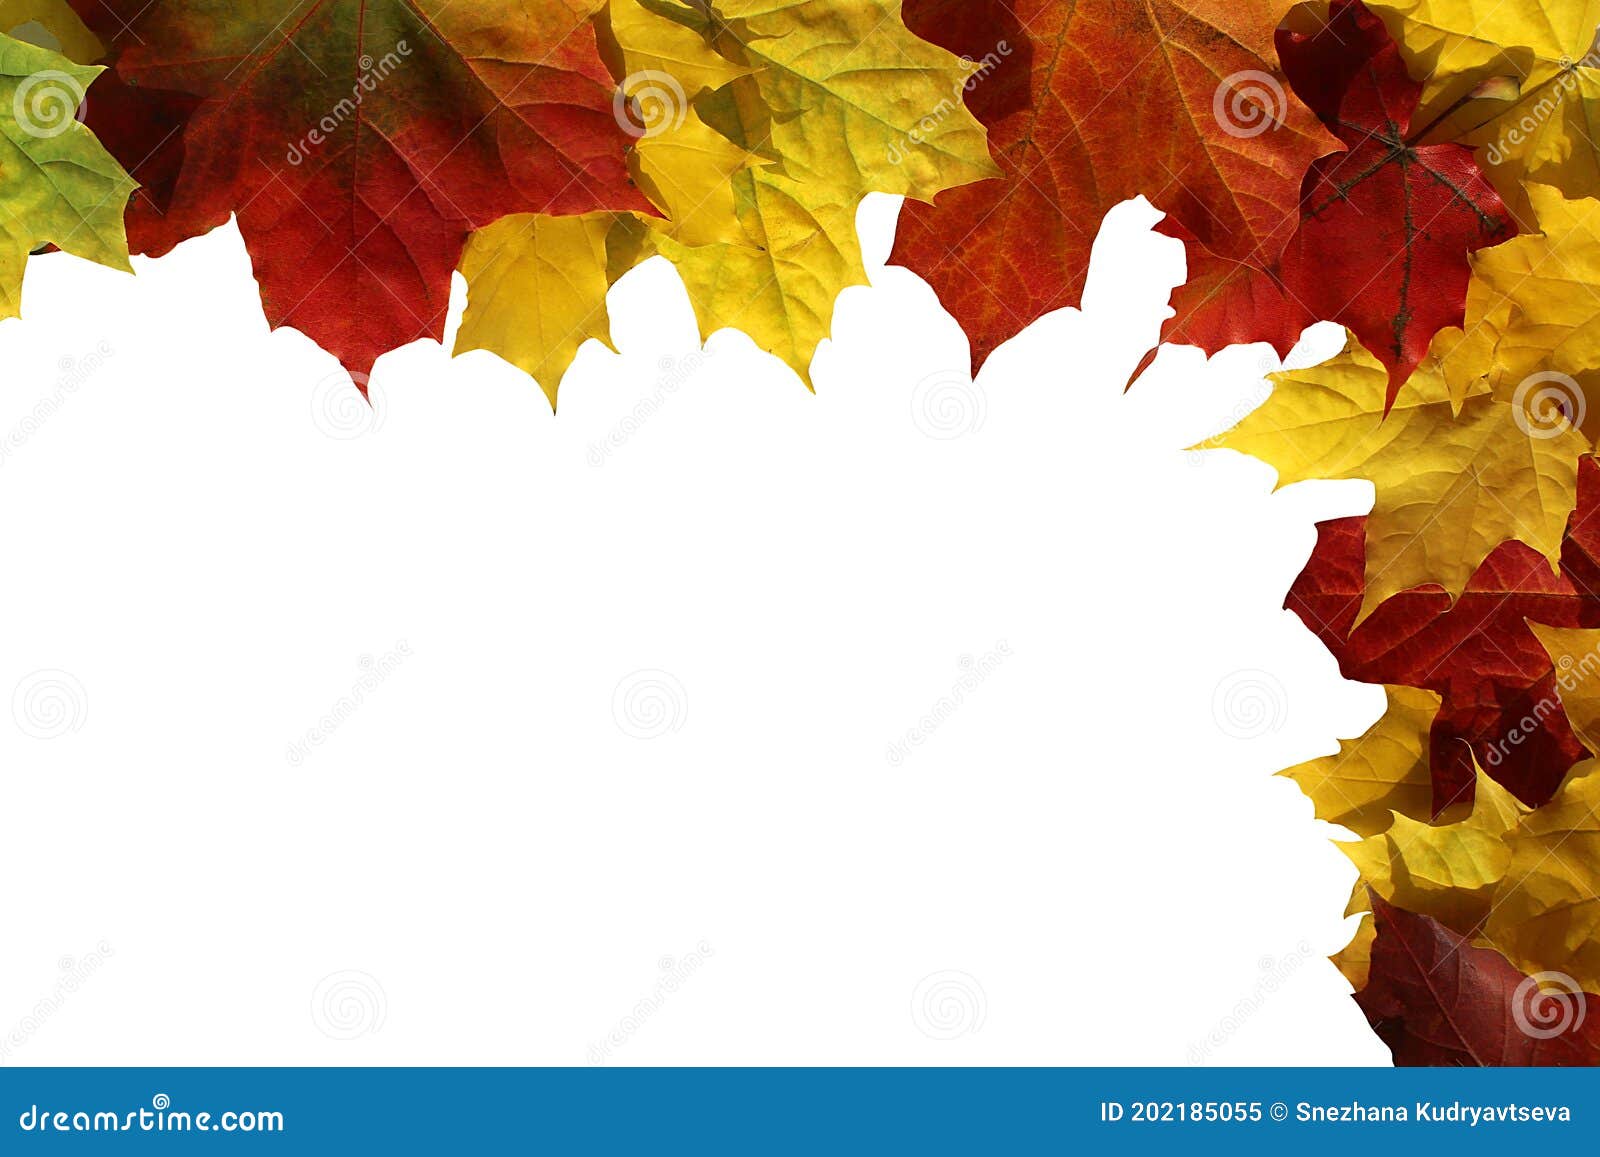 autumn maple leaves lie on a white background with place for text